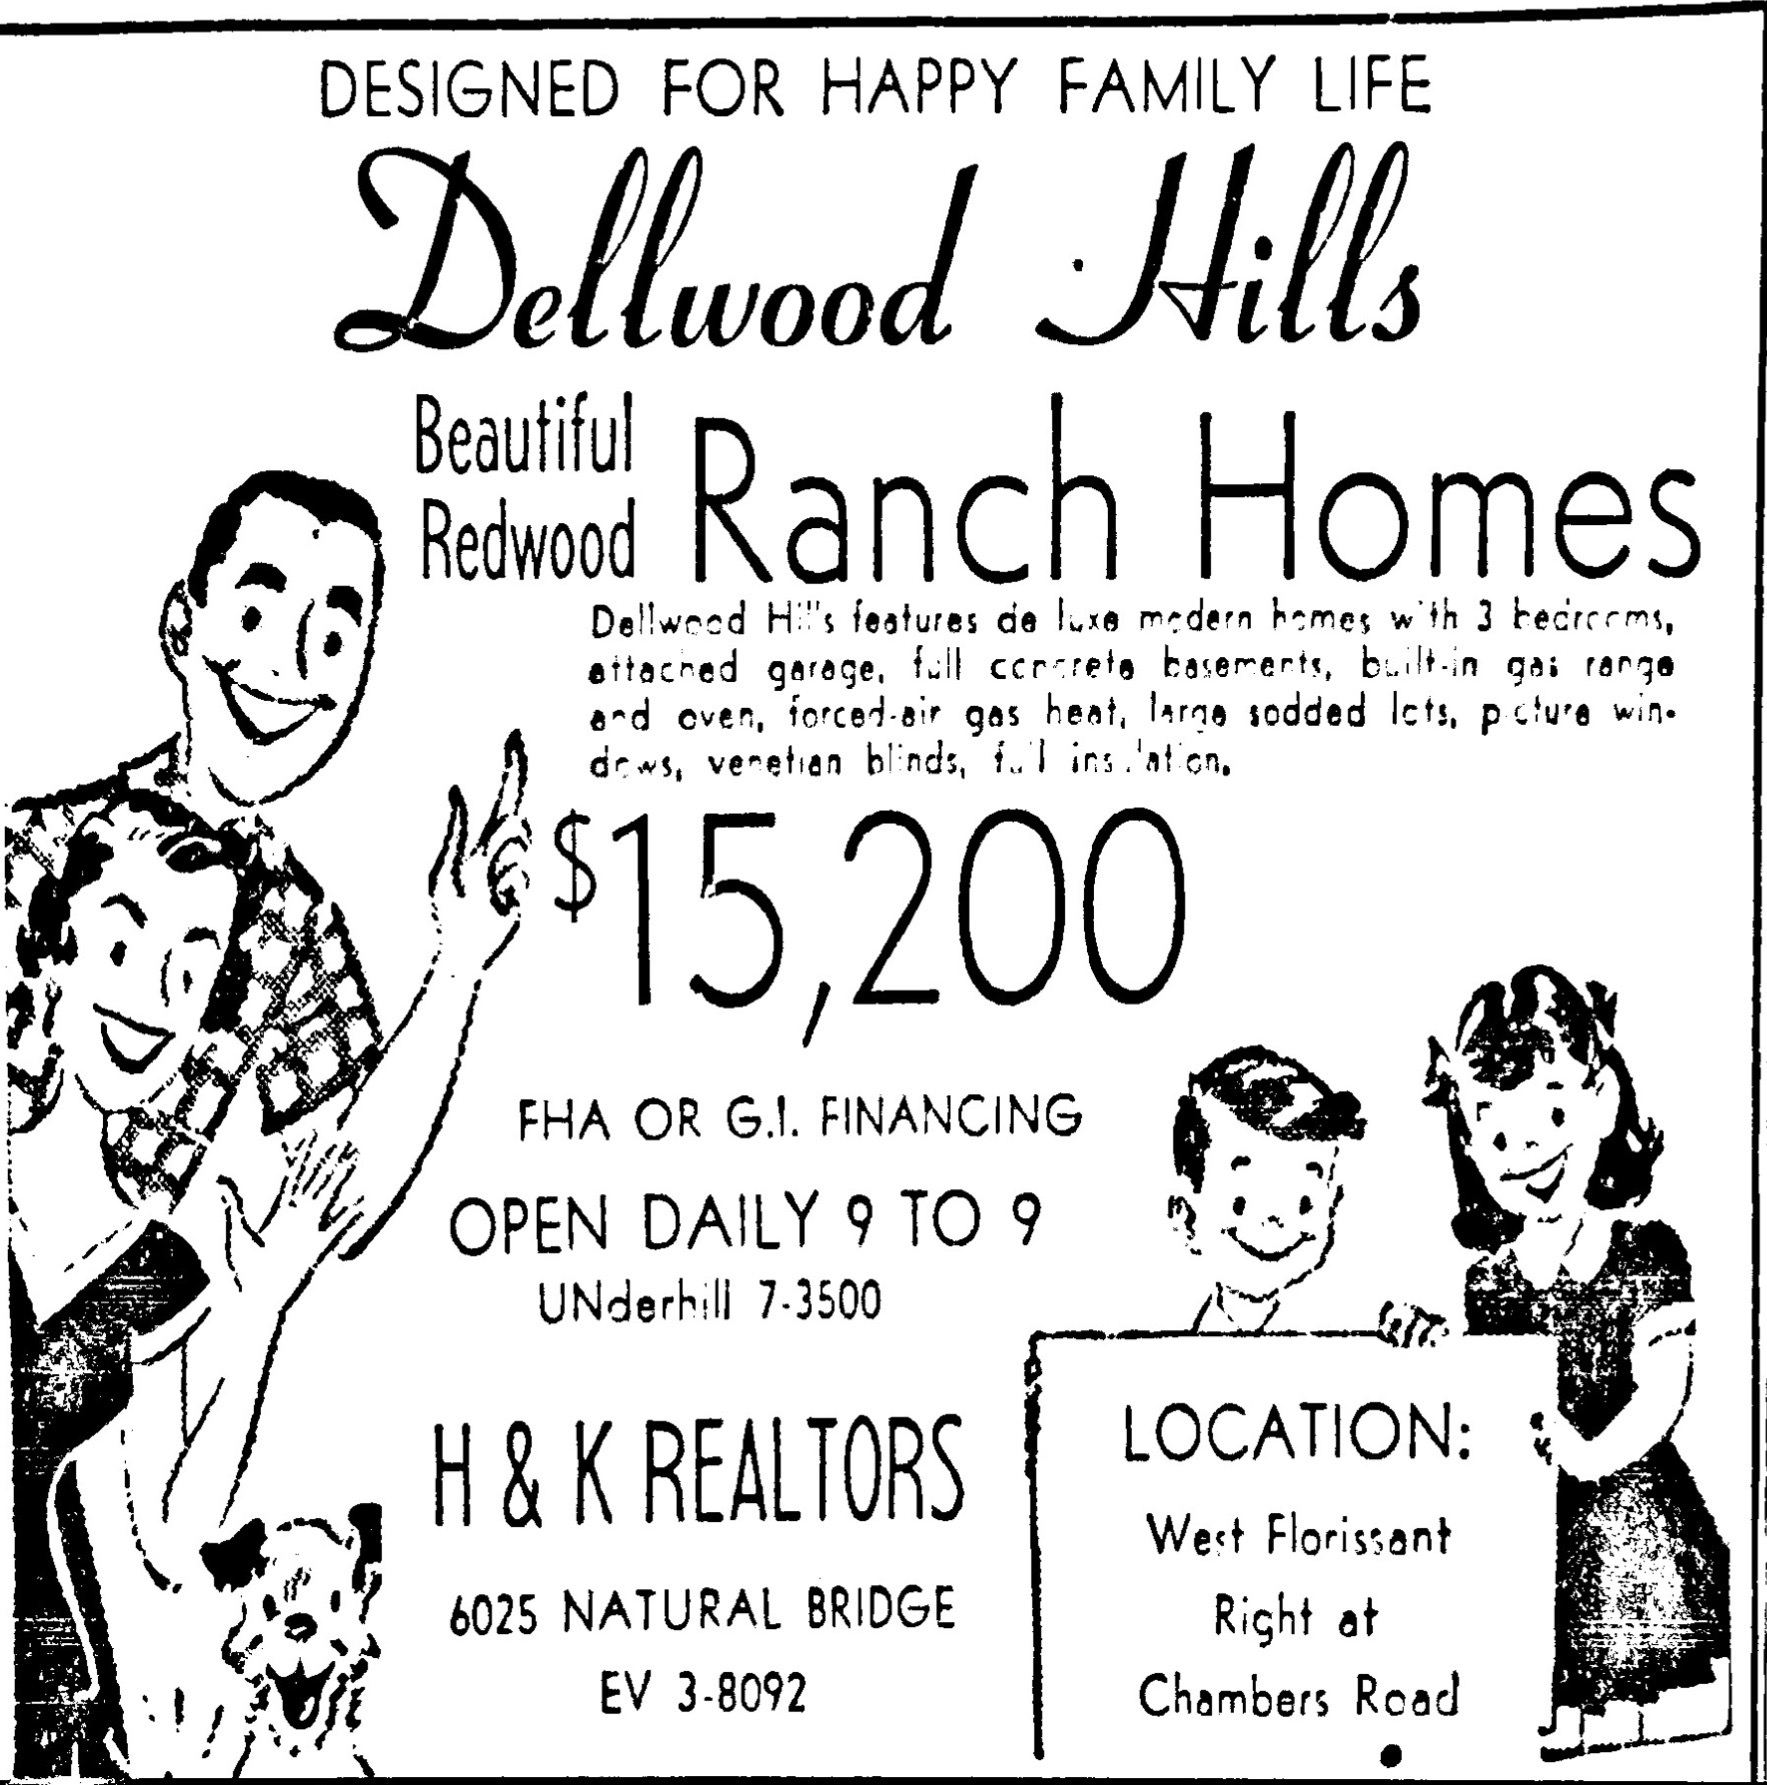 Dellwood Hills promotional ad. St. Louis Post-Dispatch, May 1, 1955. 